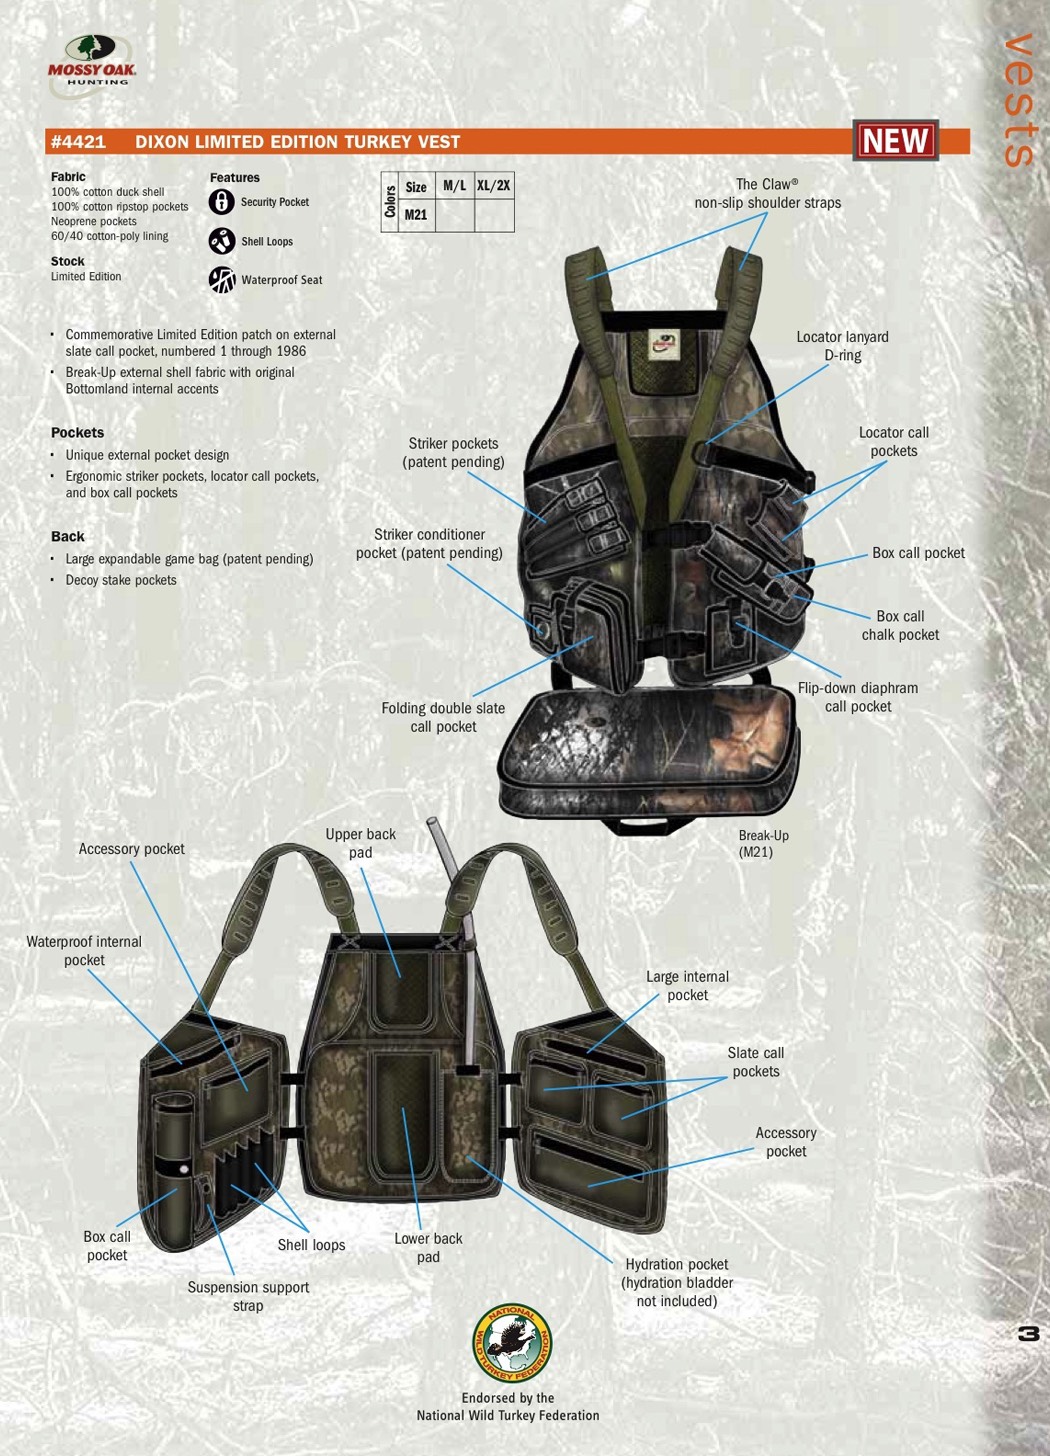 The Legacy of the Mossy Oak Dixon Vest